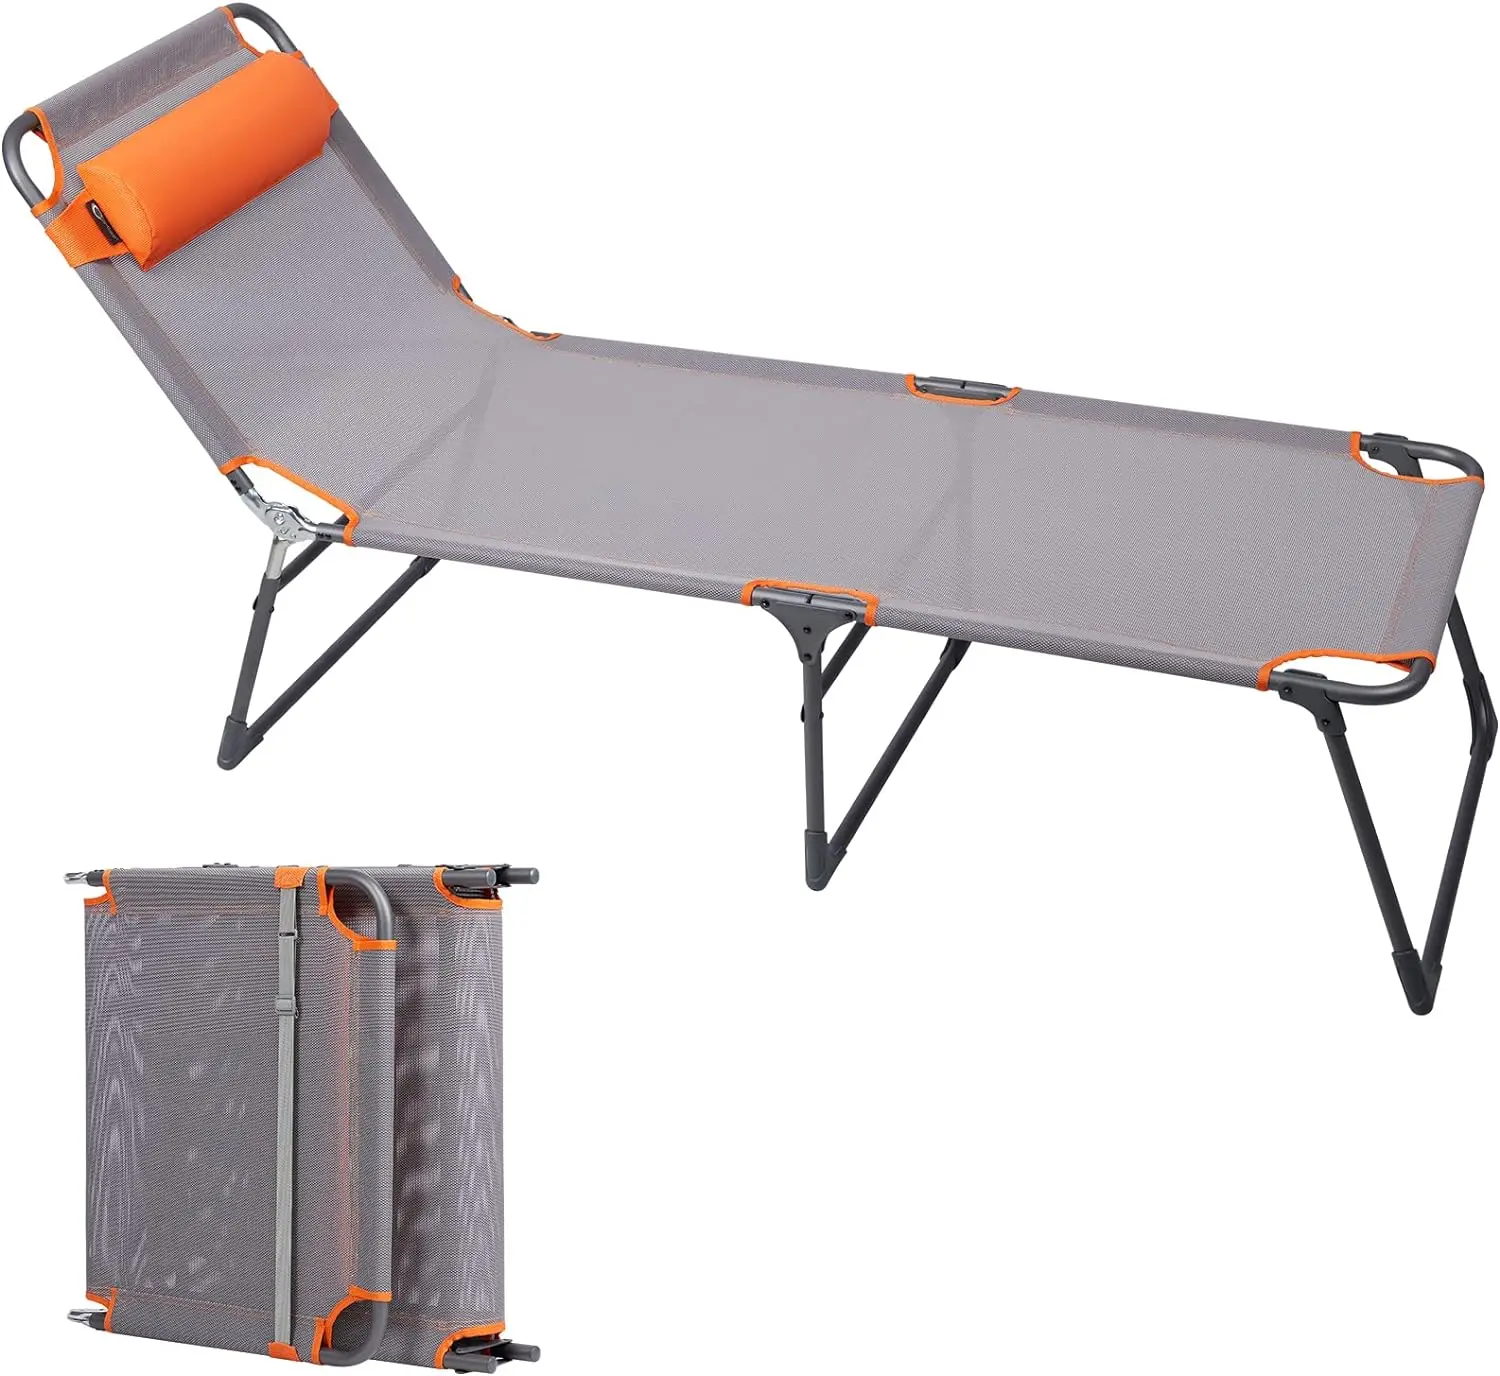 

Portable Cot for Adults, Folding Chair, 4-Position Recliner with 250lbs Weight Capacity Lounger, Travel, Camping, Beach, Grey, O